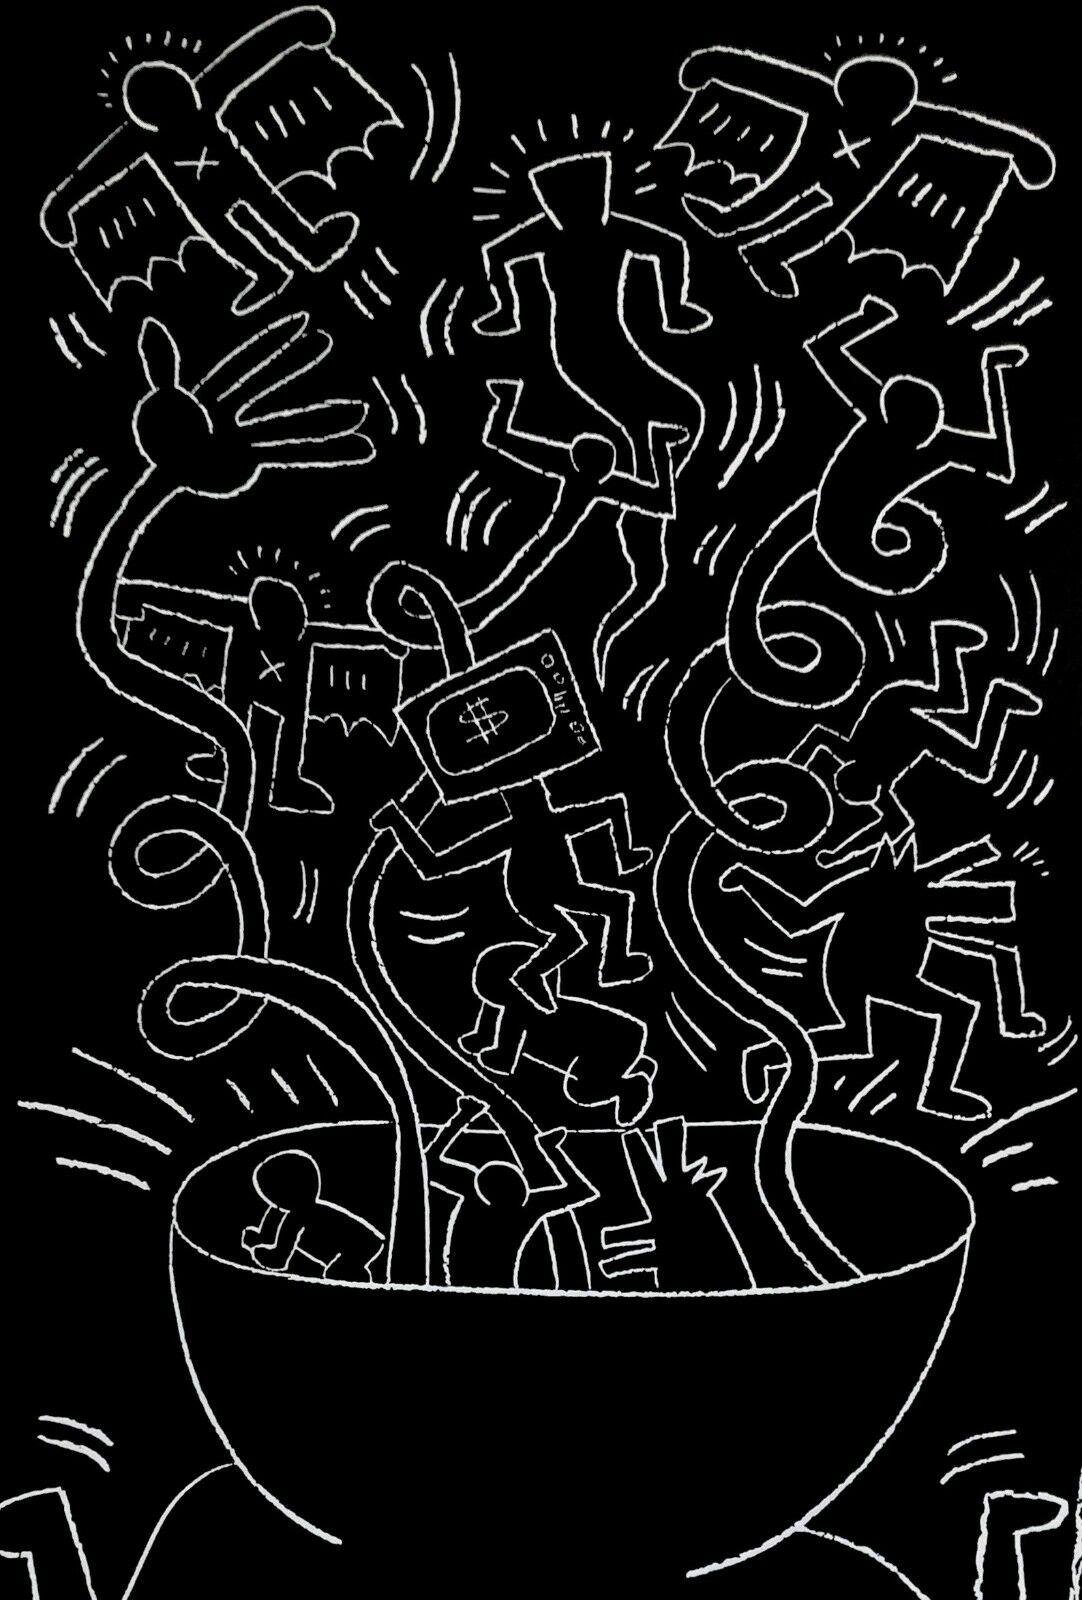 Haring, Future Primeval - Print by Keith Haring